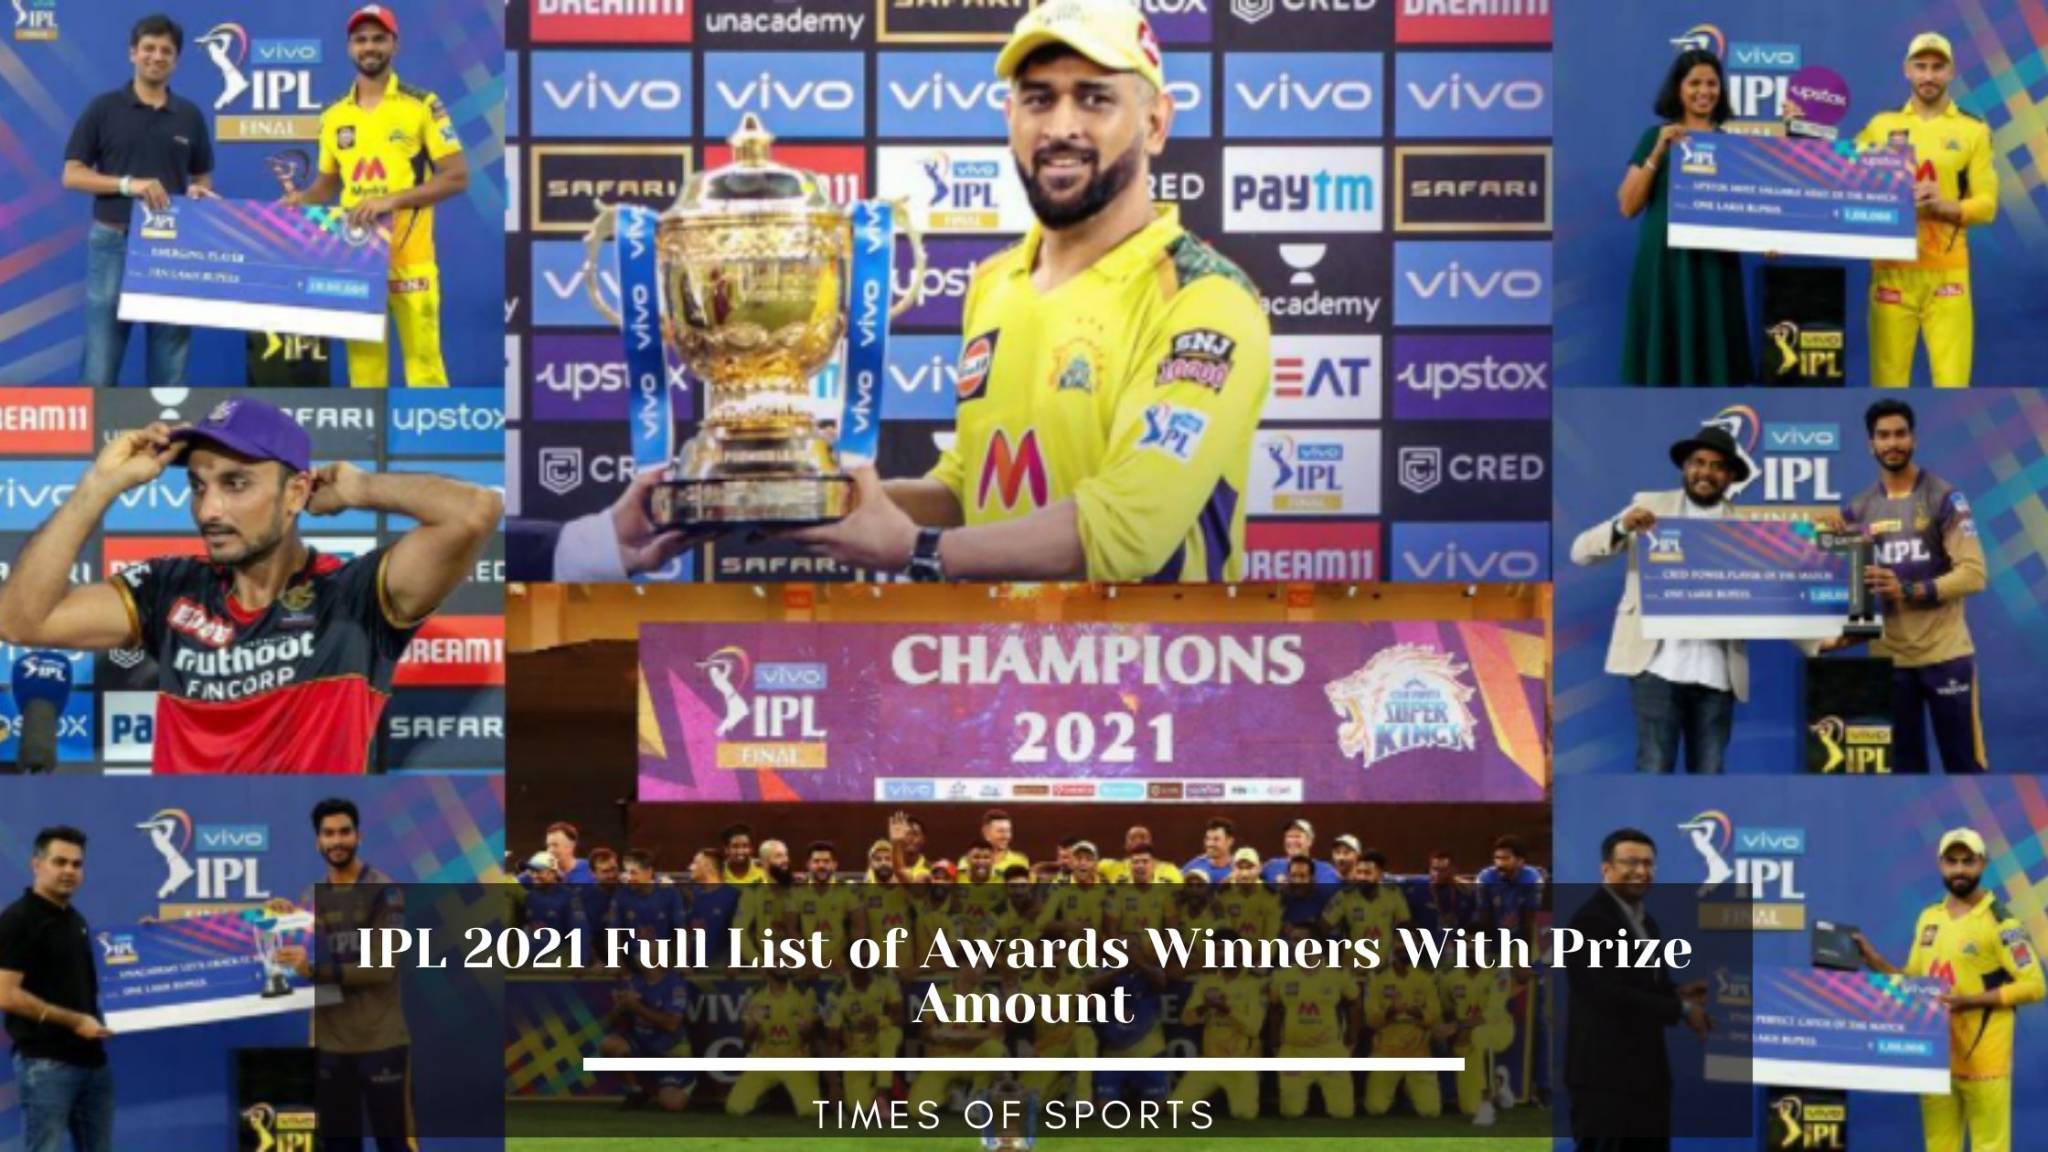 IPL 2021 Awards List Winners Details With Prize Amount